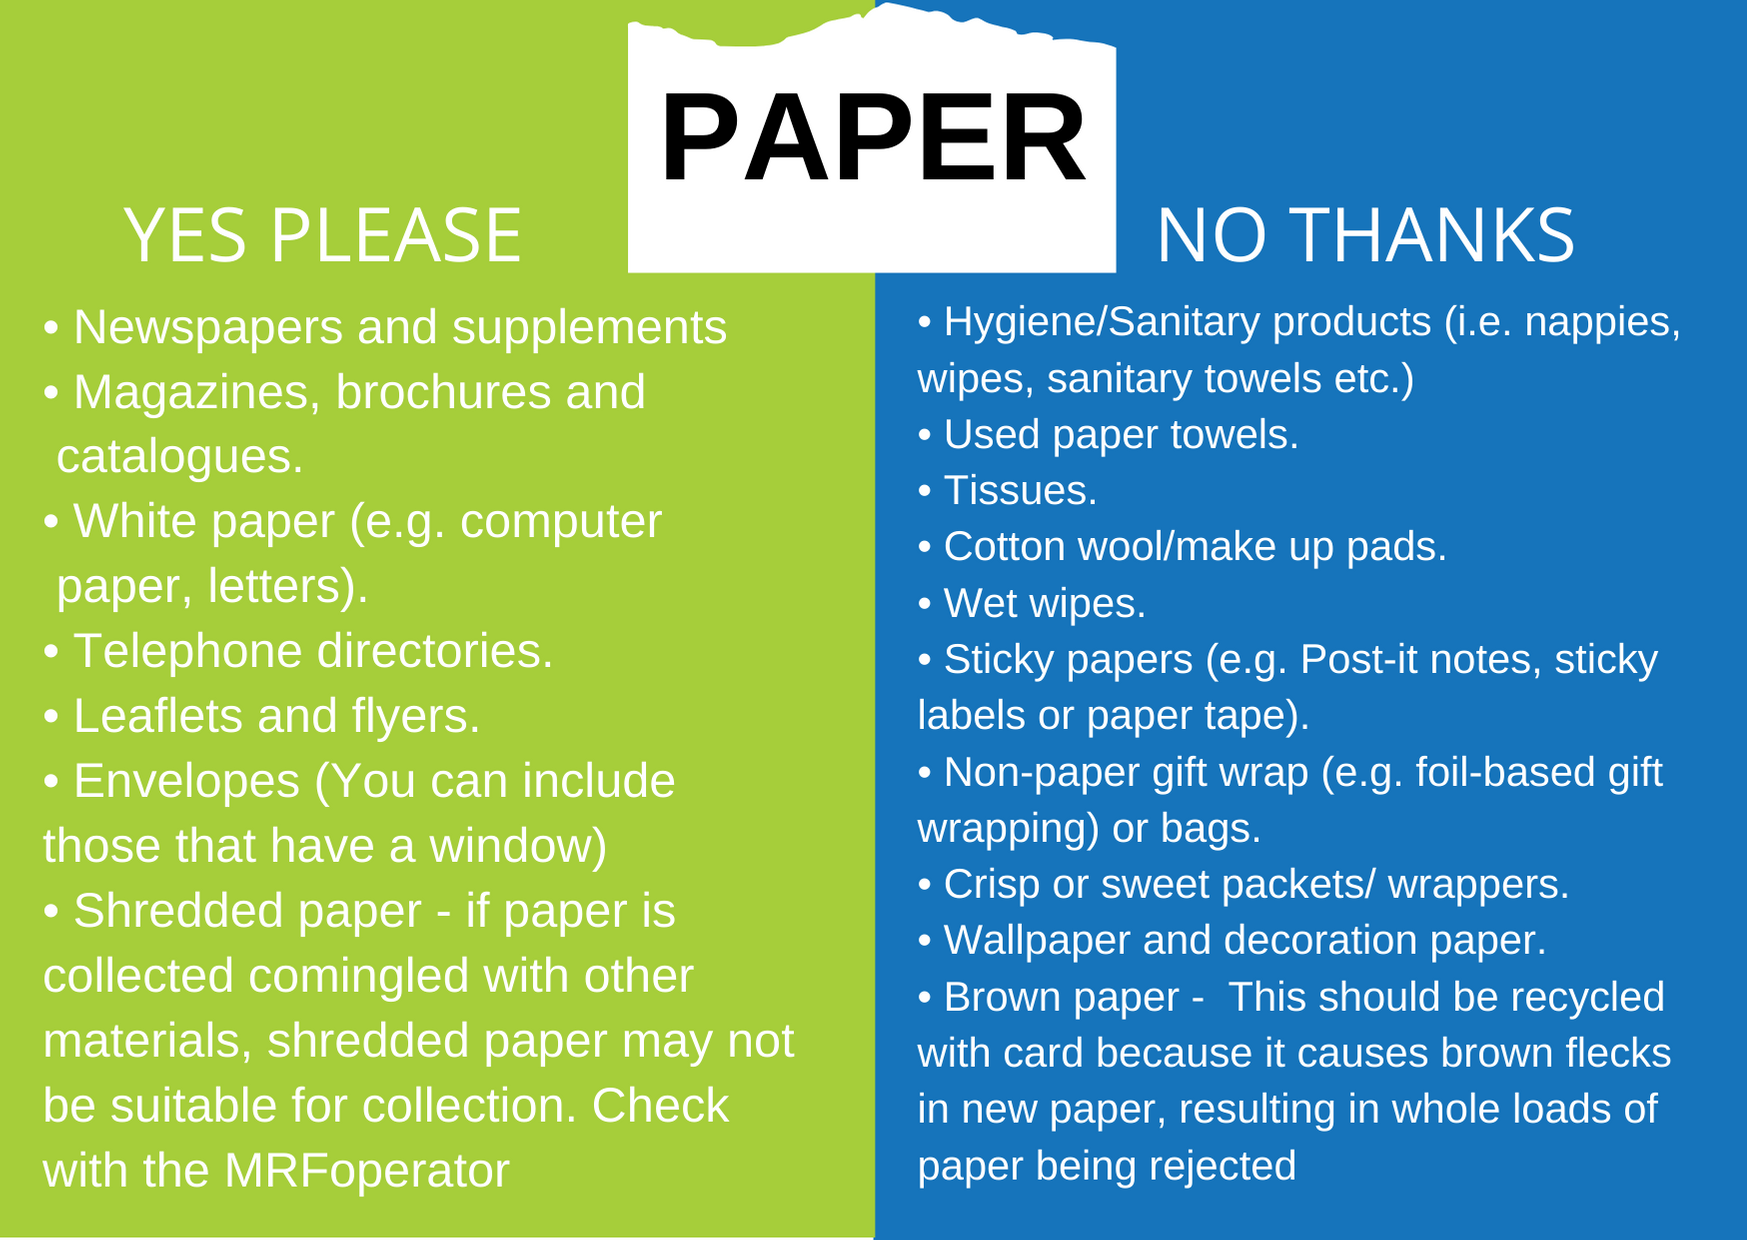 What PAPER can i recycle